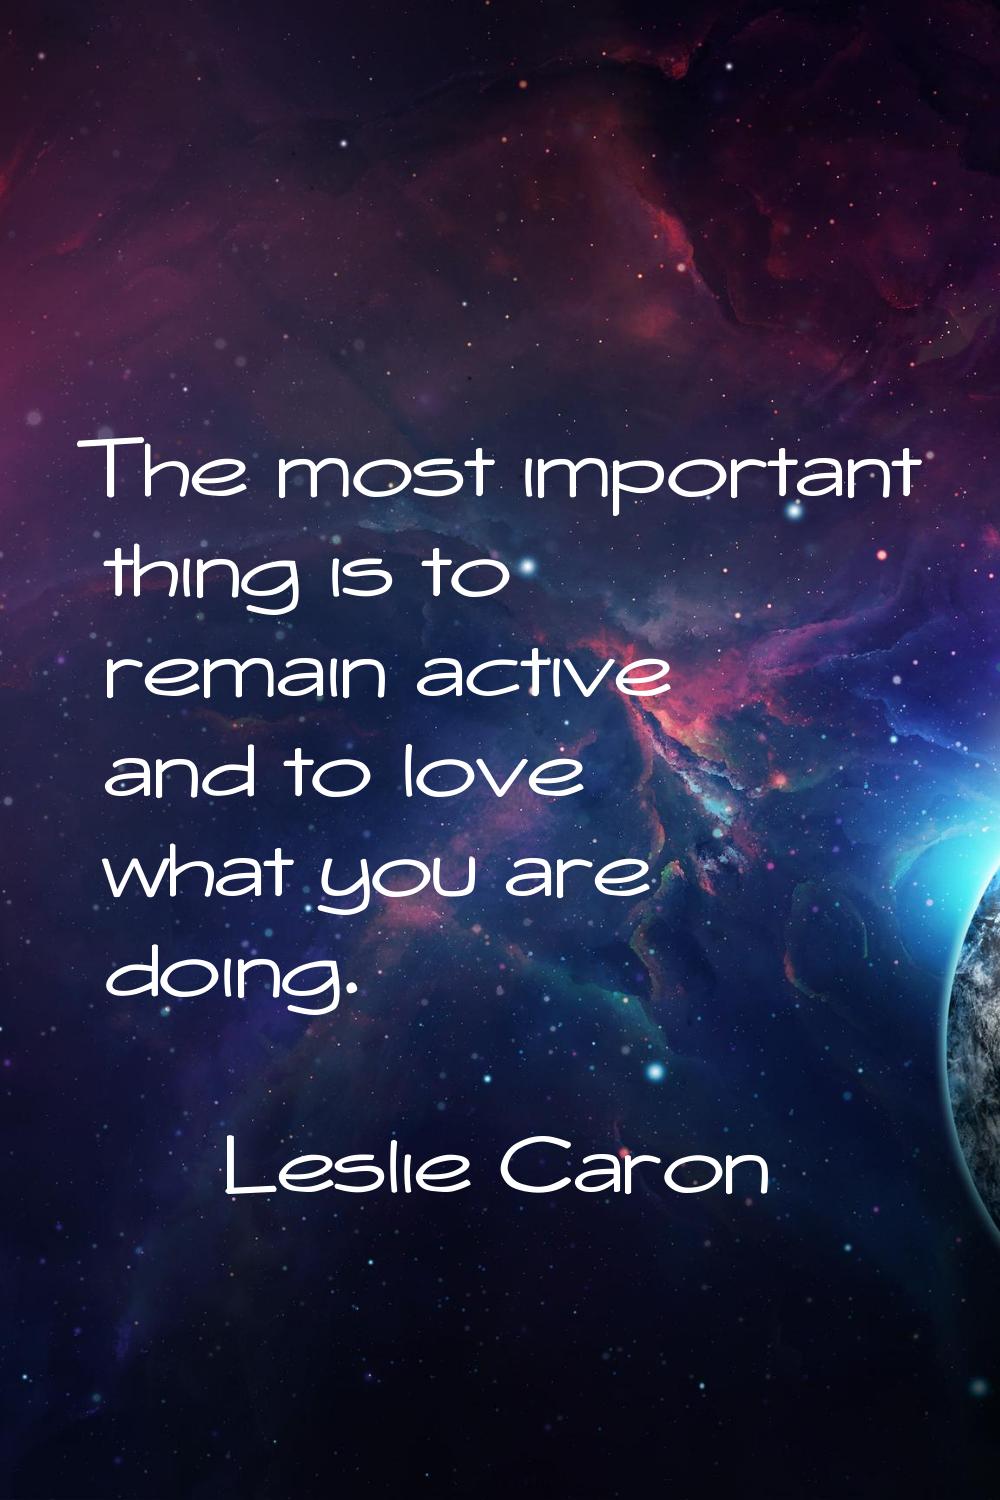 The most important thing is to remain active and to love what you are doing.